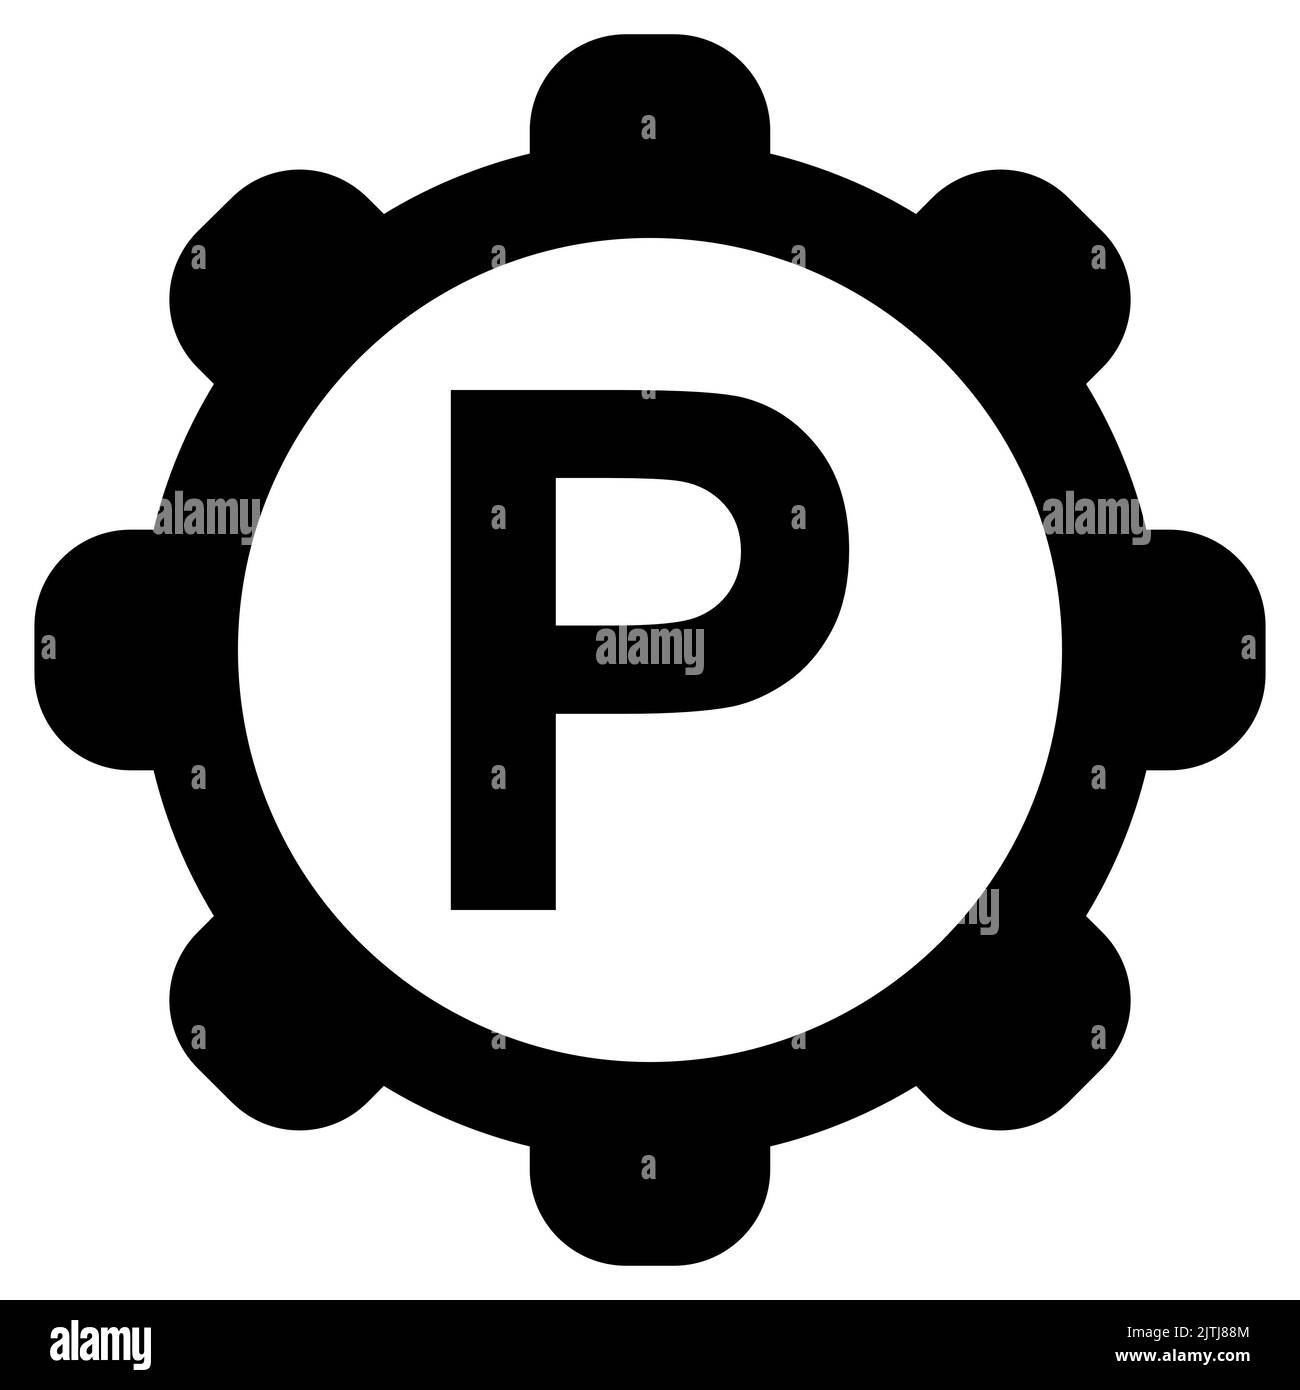 Parking and wheel Stock Photo